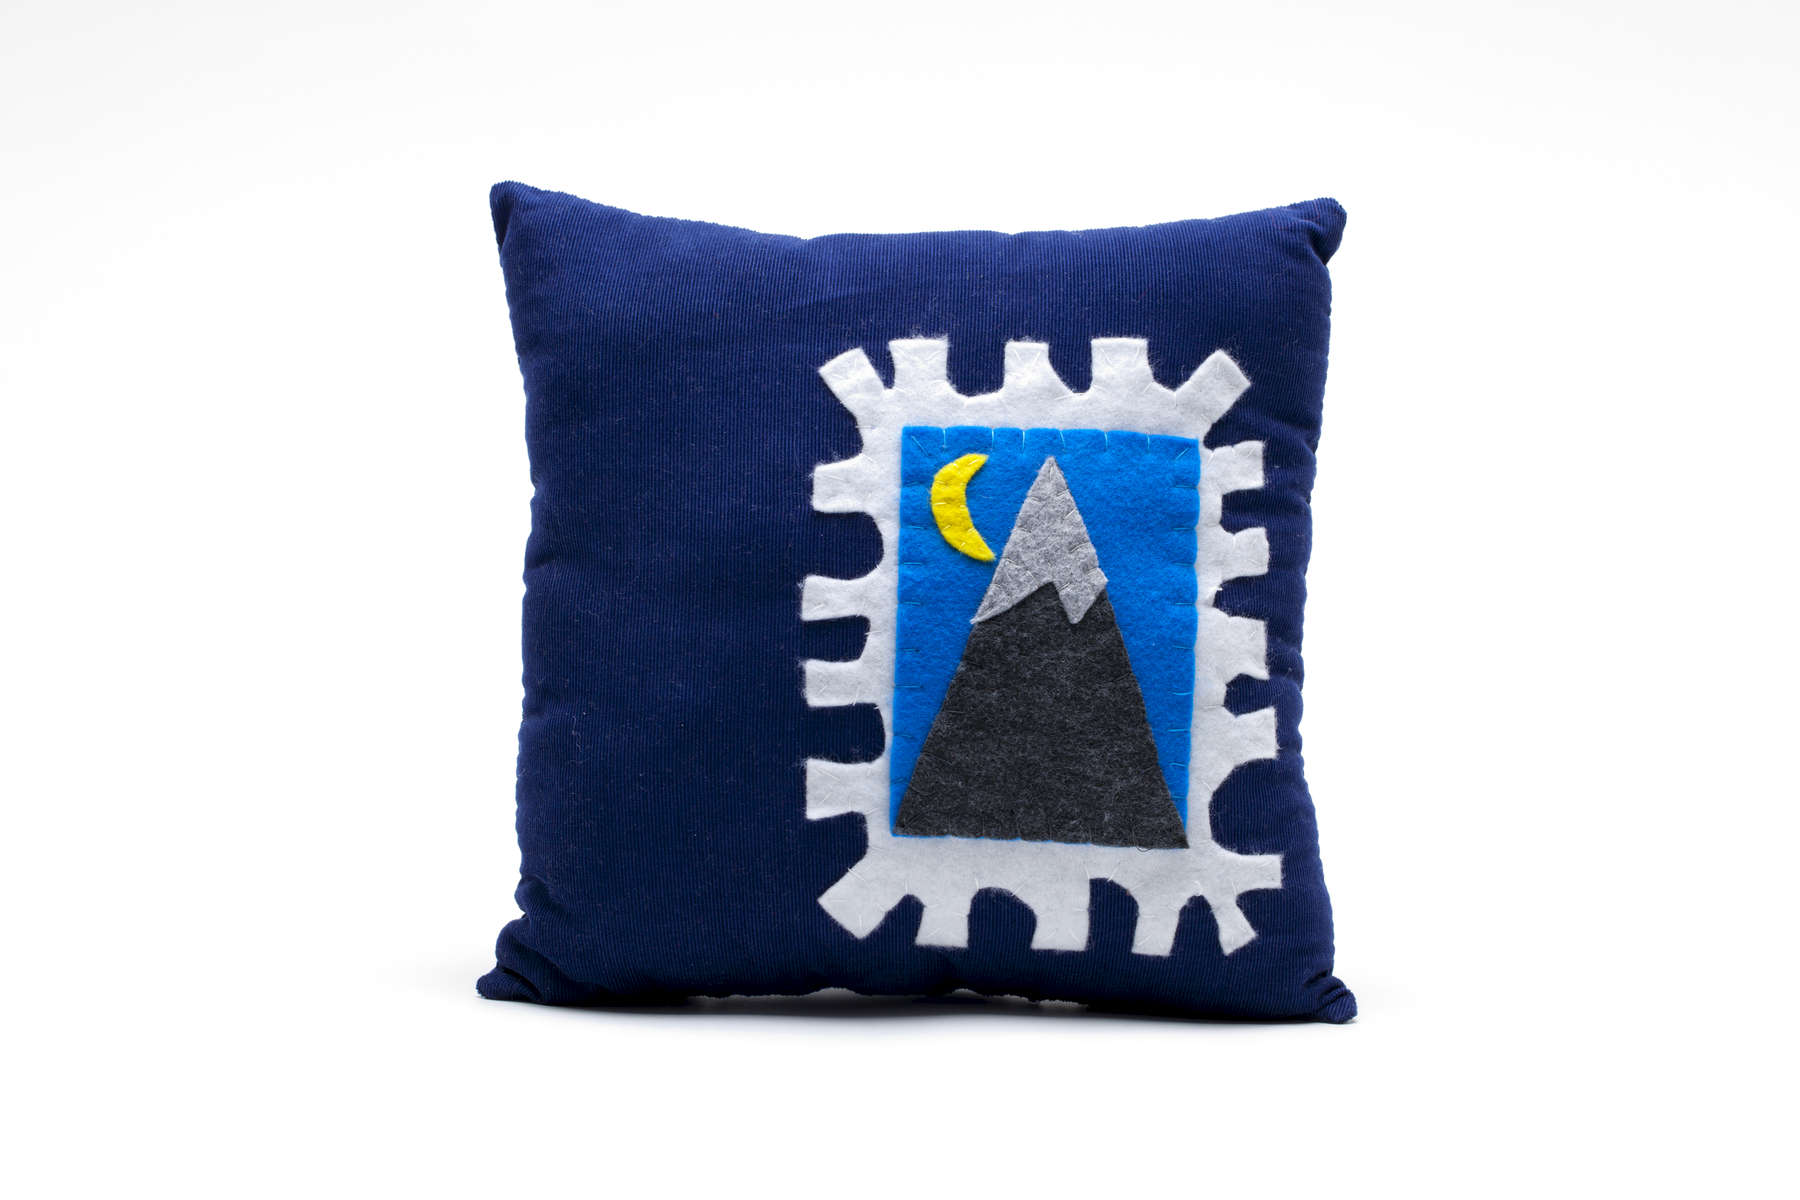 pURCHASE hEREhandmade royal blue corduroy pillow featuring a hand-stitched stamp made of felt. that depicts a mountain + a moon. measures approximately 11 x 11 inches // crafted + hand-sewn in boulder, colorado.